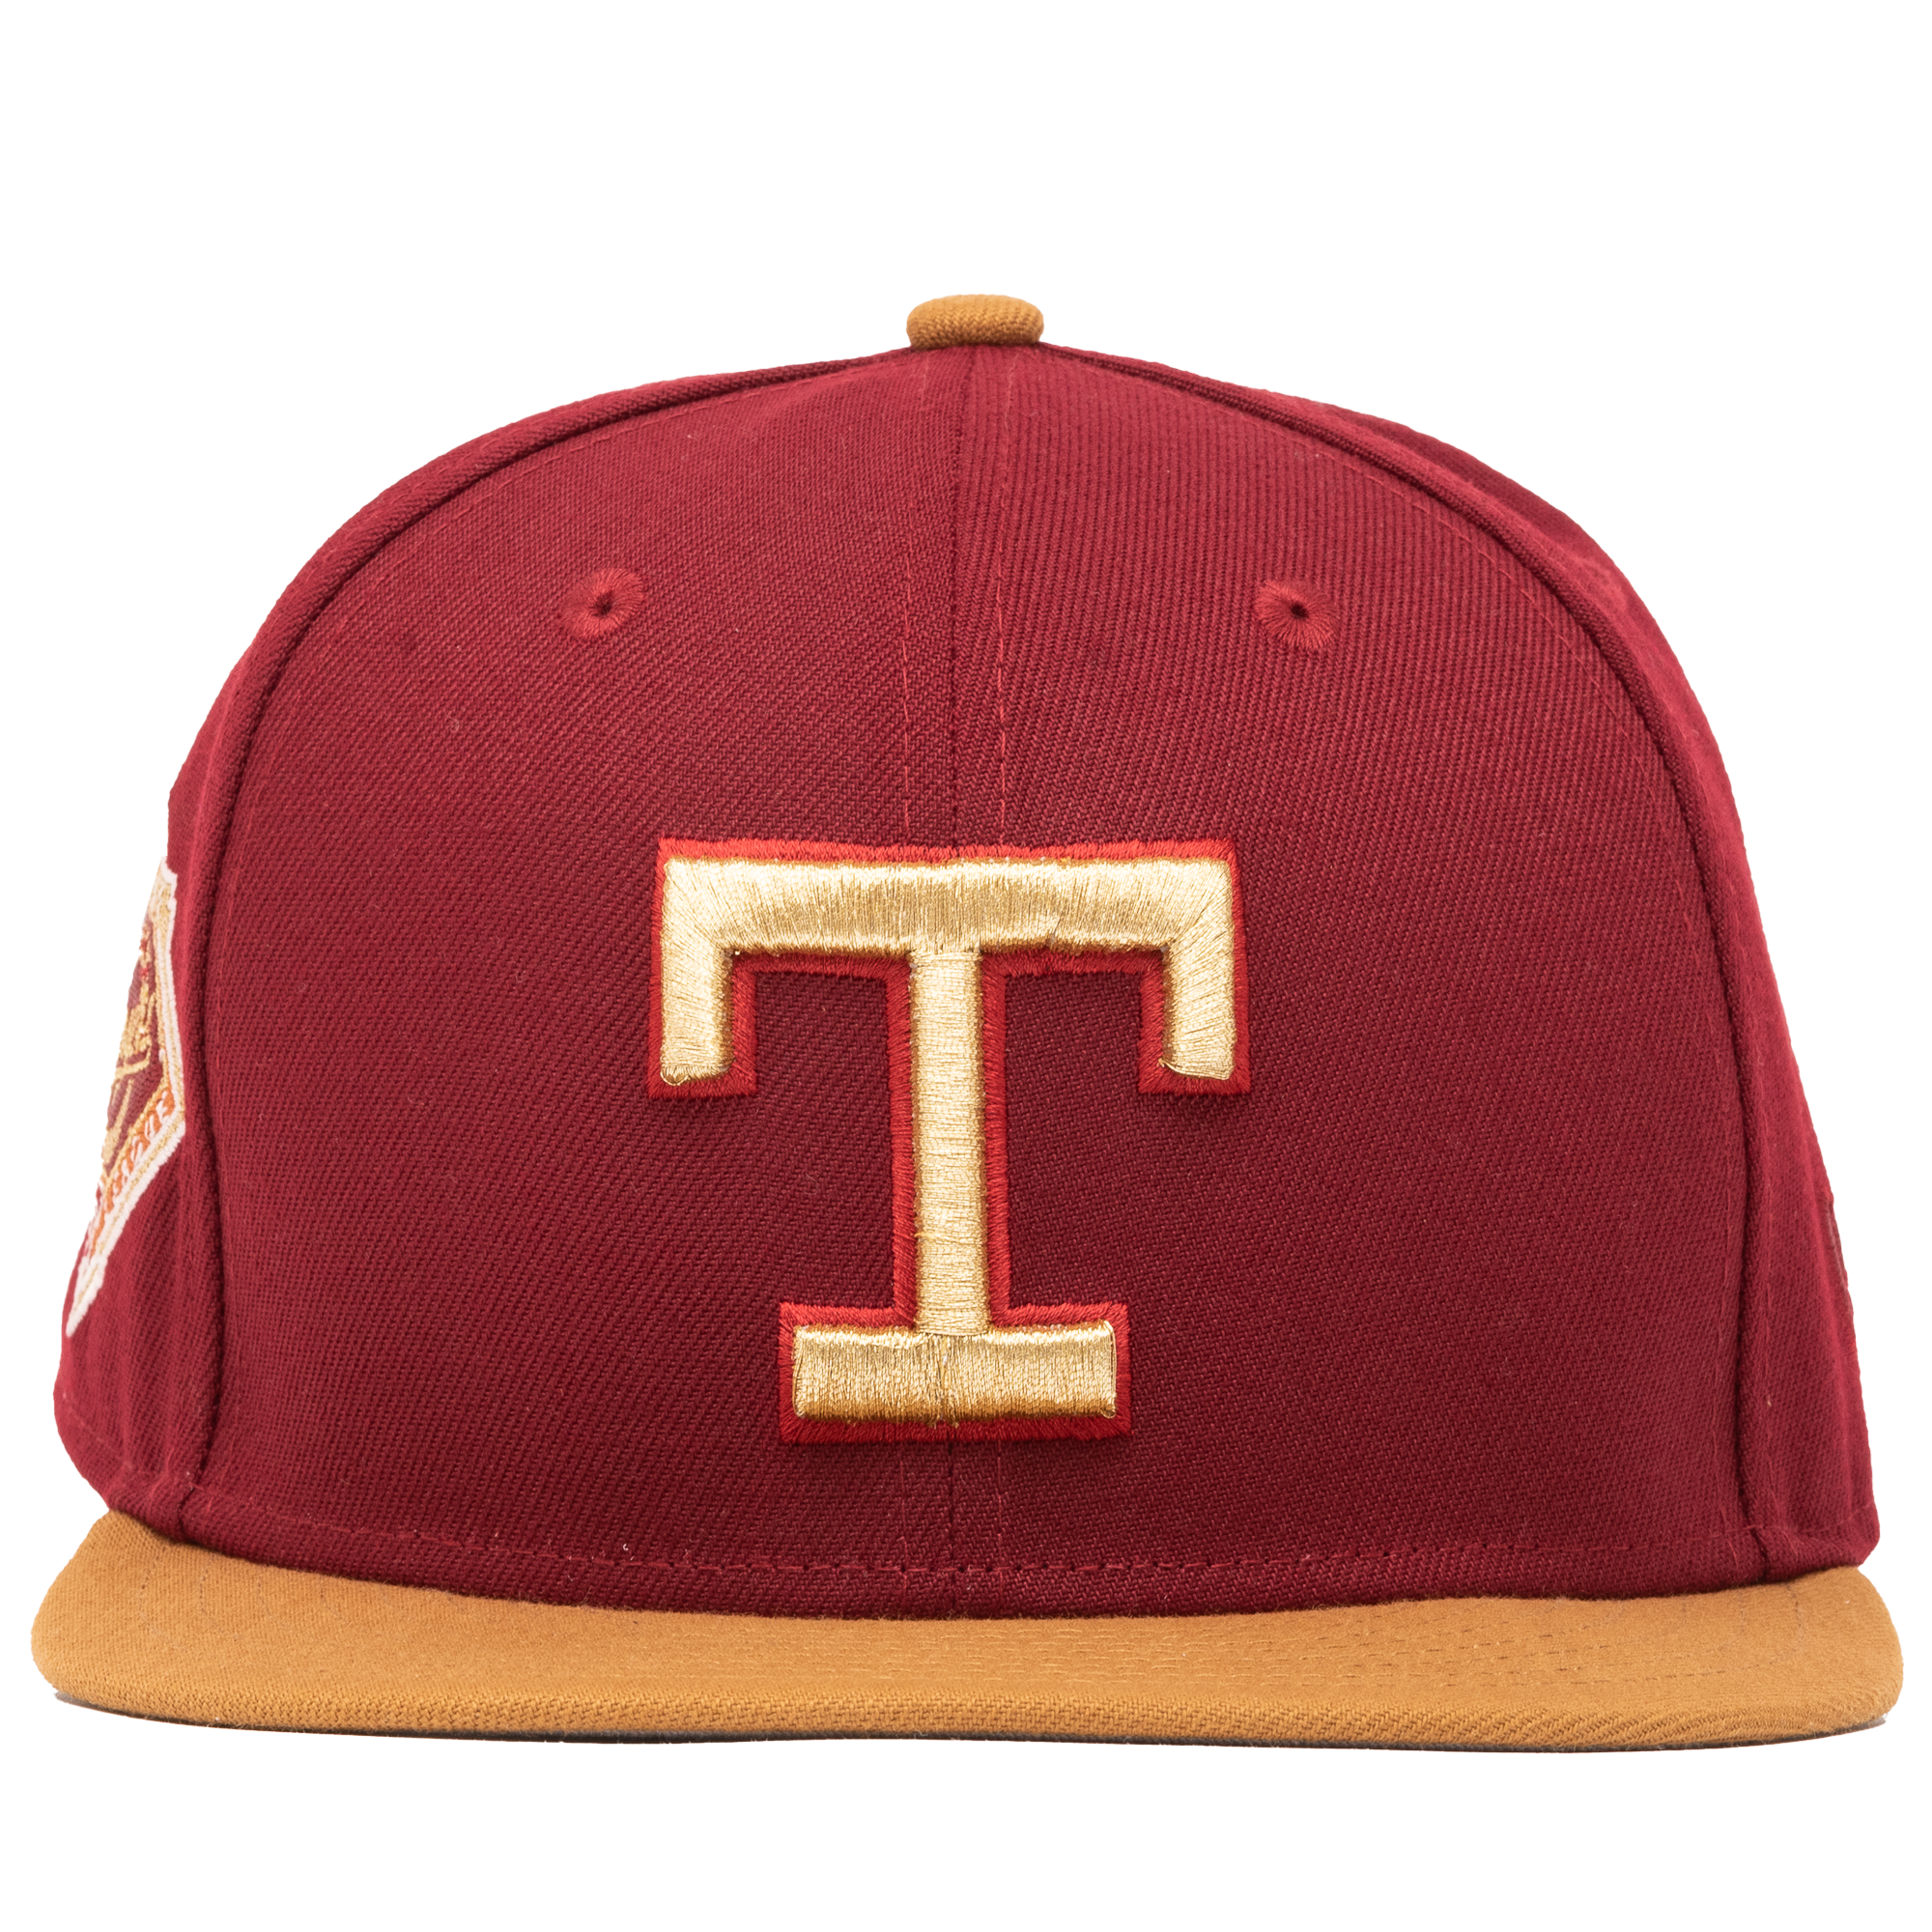 New Era x Politics Texas Rangers 59FIFTY Fitted Hat - Russet/Sand, Size 7 3/4 by Sneaker Politics